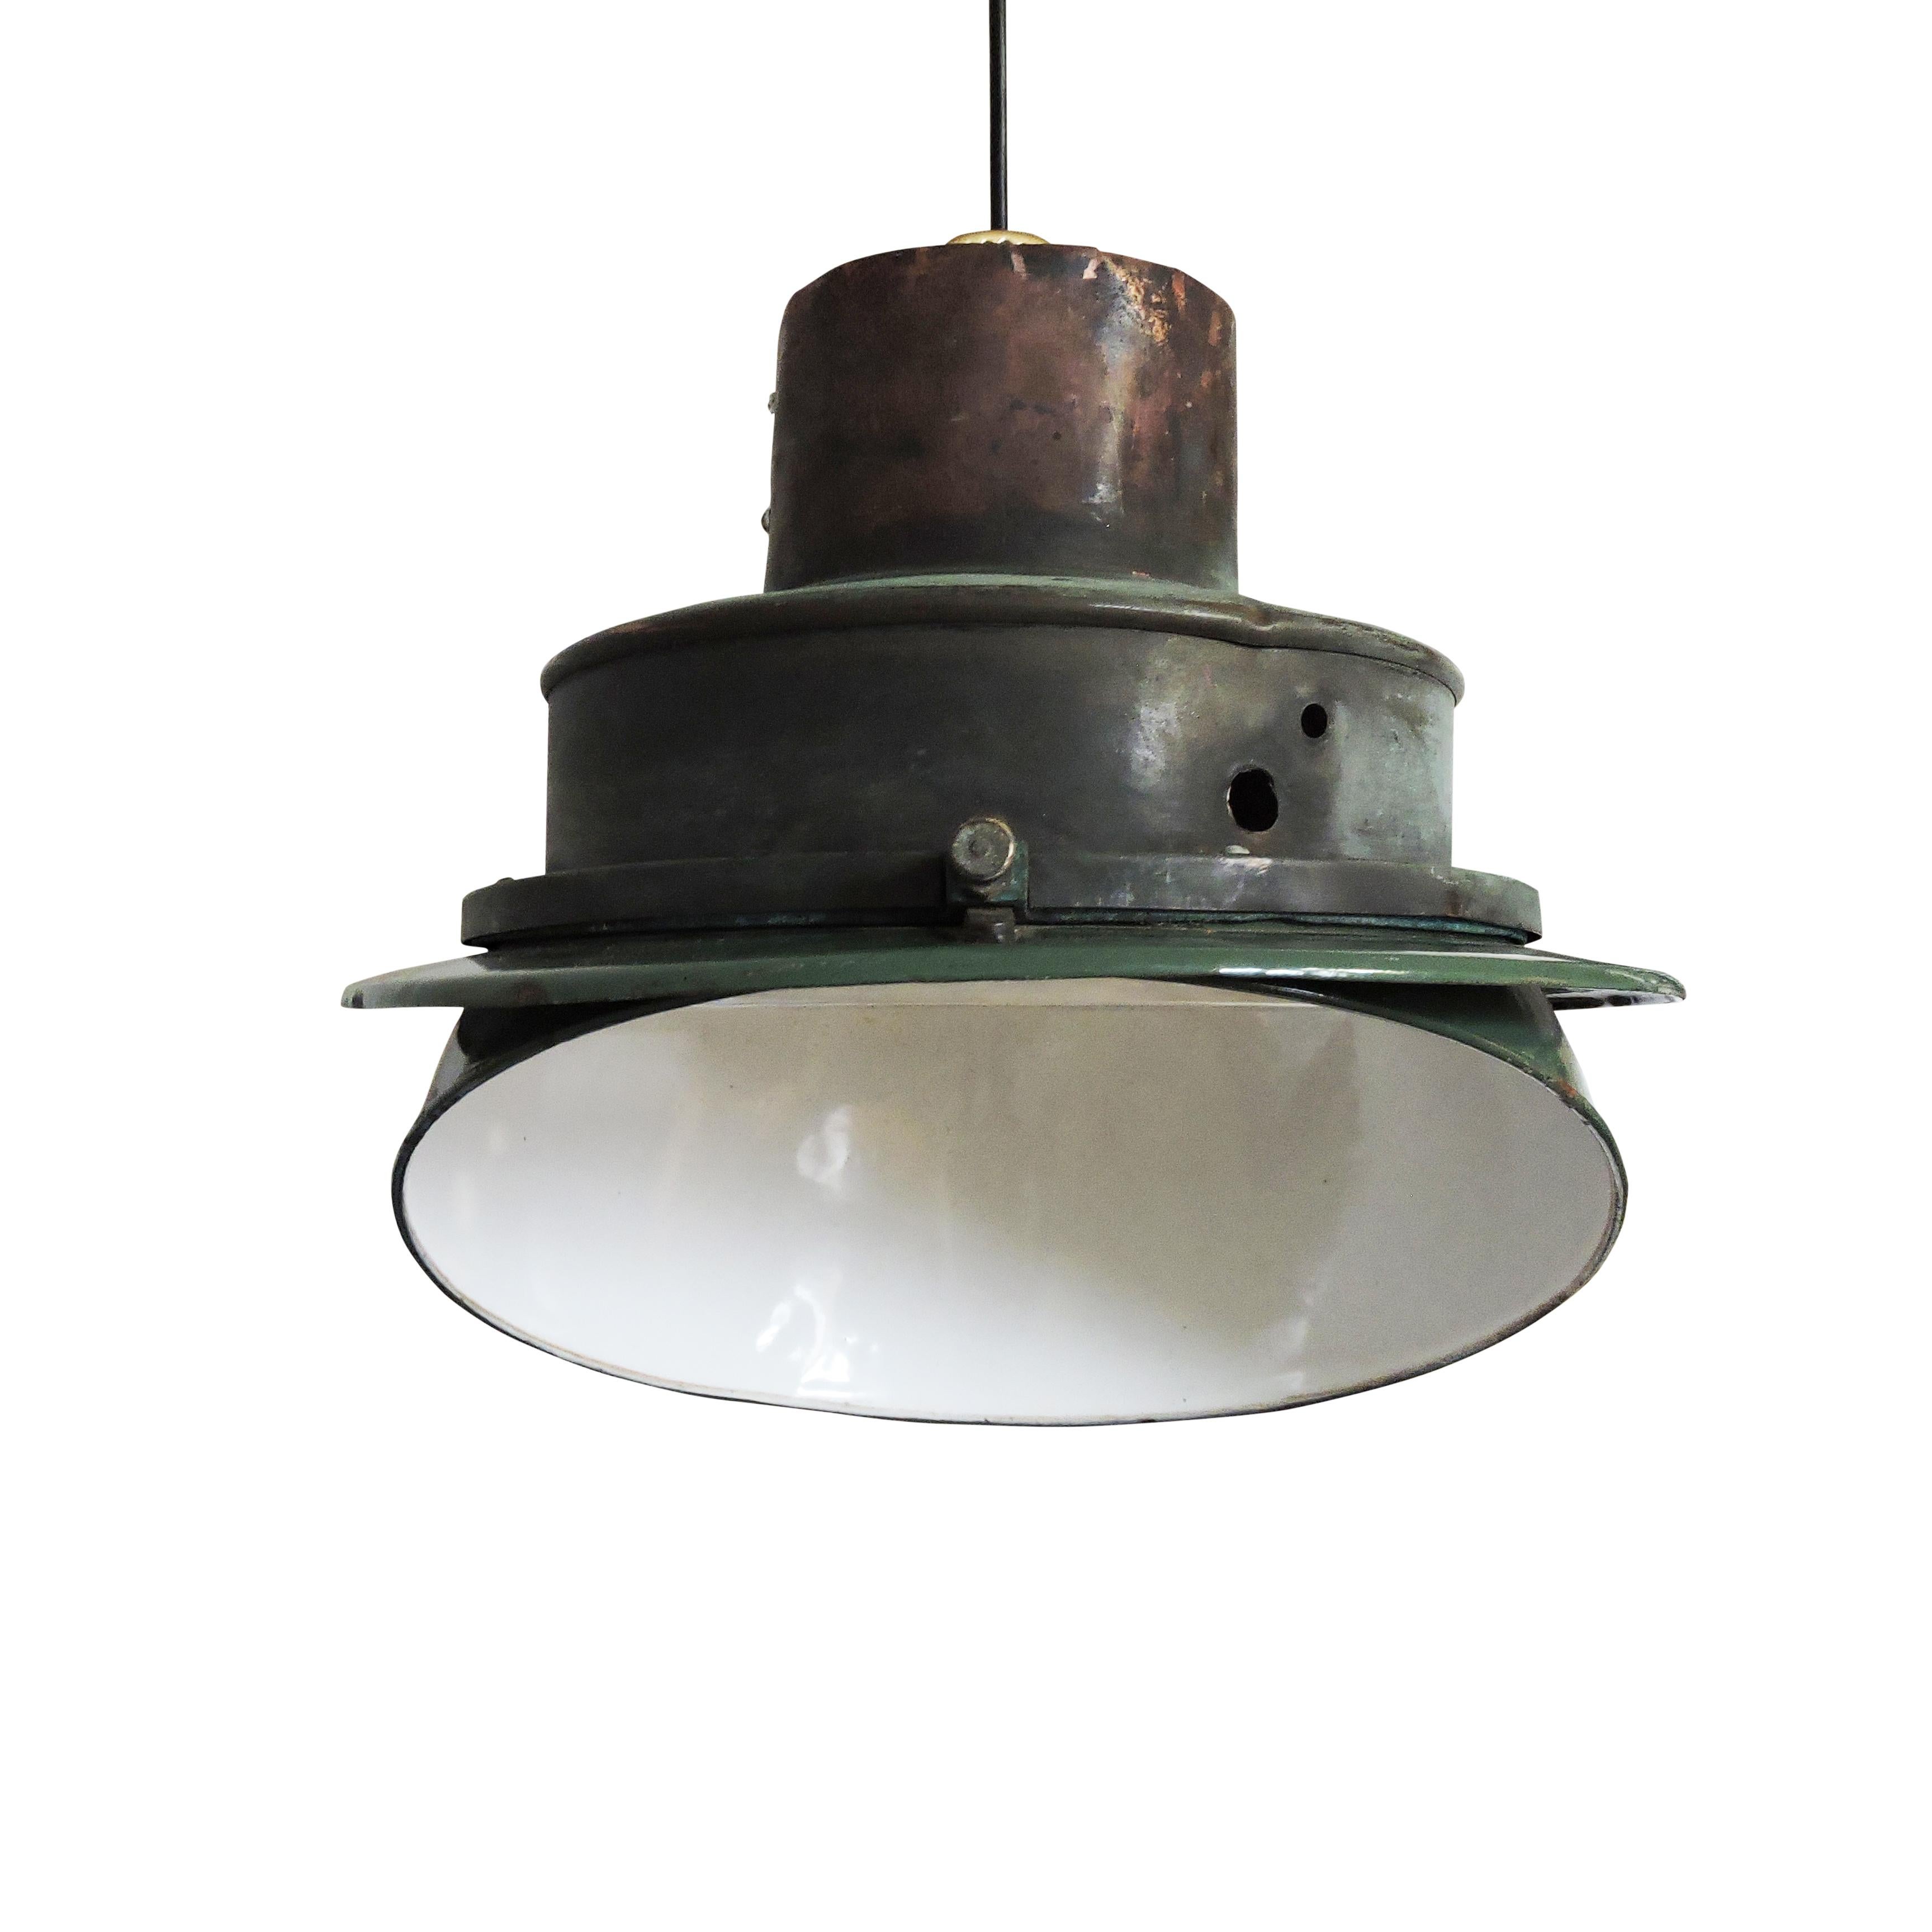 A 1950s midcentury green industrial angled enamel pendant lamp.

A professional electrician has rewired this piece to be in working order.

Plug type - UK plug (up to 250V).